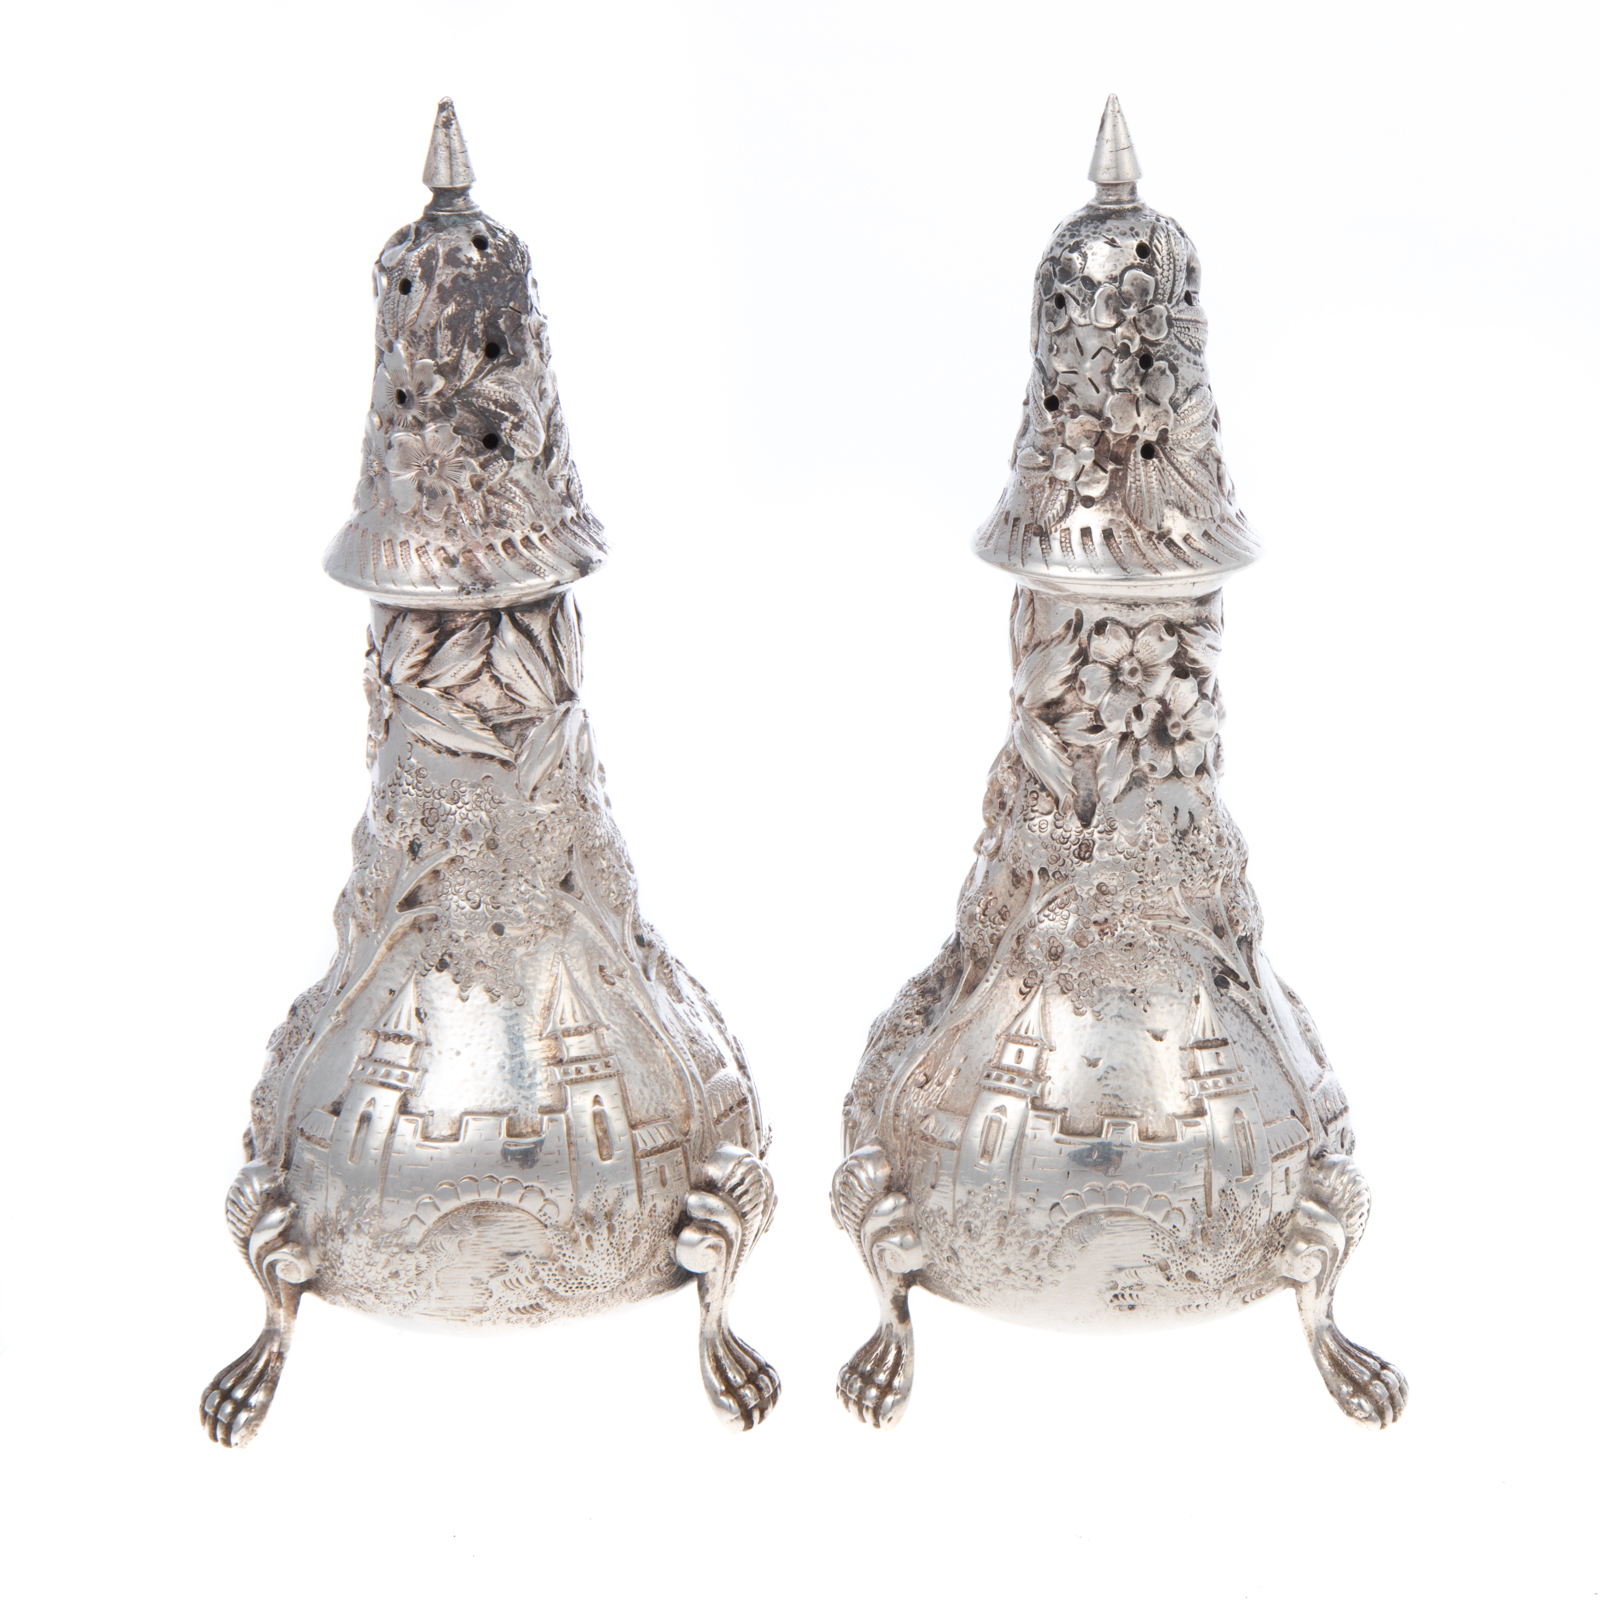 RARE PAIR OF STERLING REPOUSSE